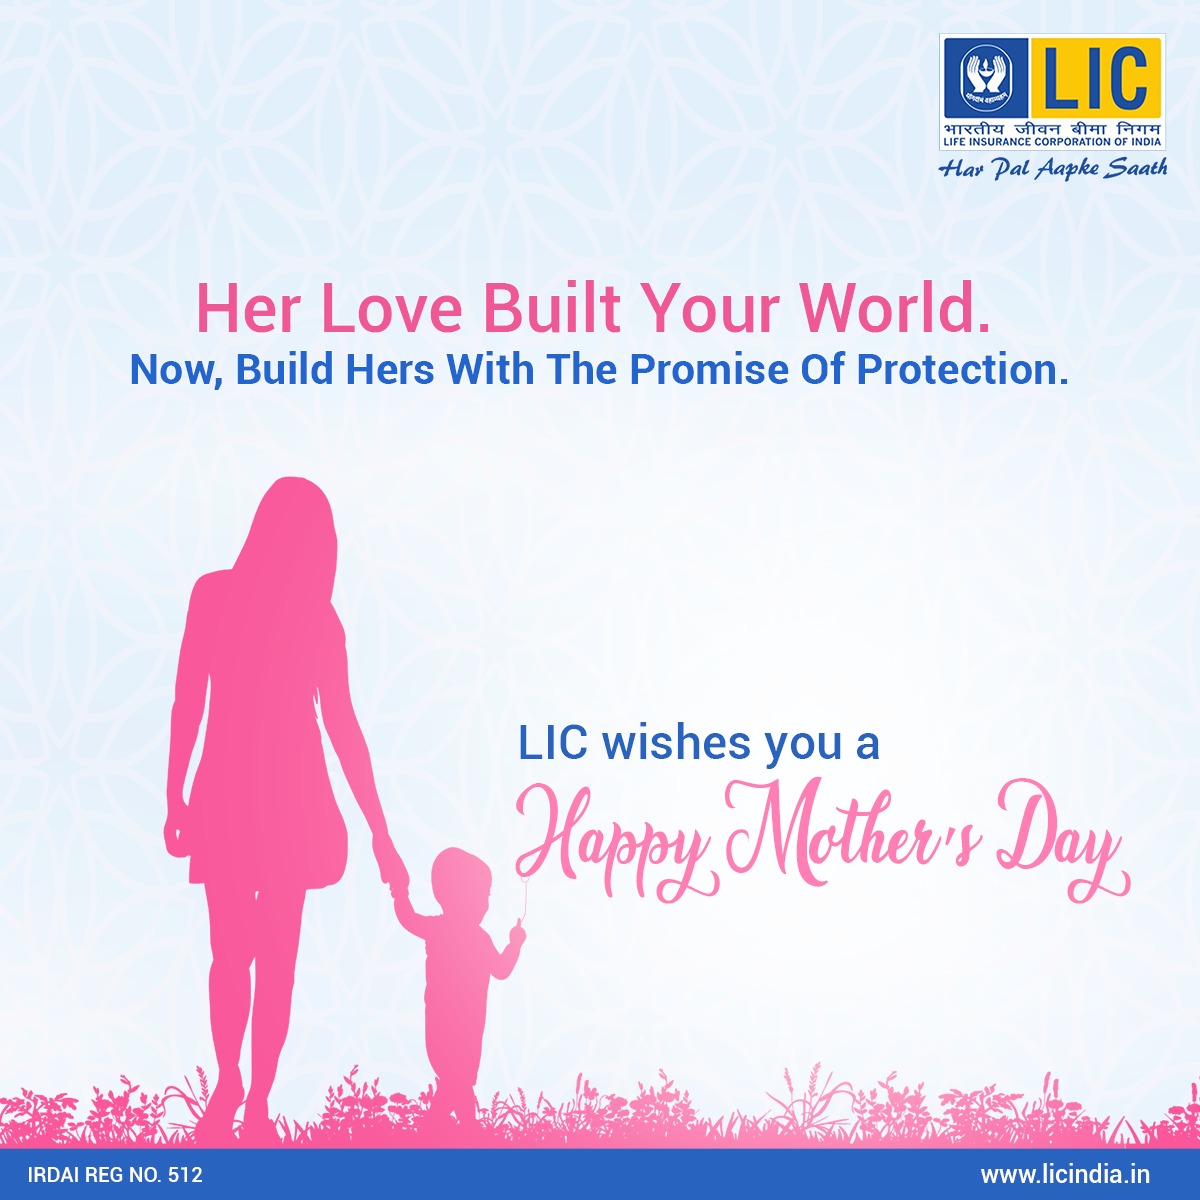 From cradle to cosmos, her love built your world. Now, it's your turn to craft hers with the unwavering promise of protection. LIC celebrates Mother's Day, urging you to cocoon her in security and love. #MothersDay #LIC